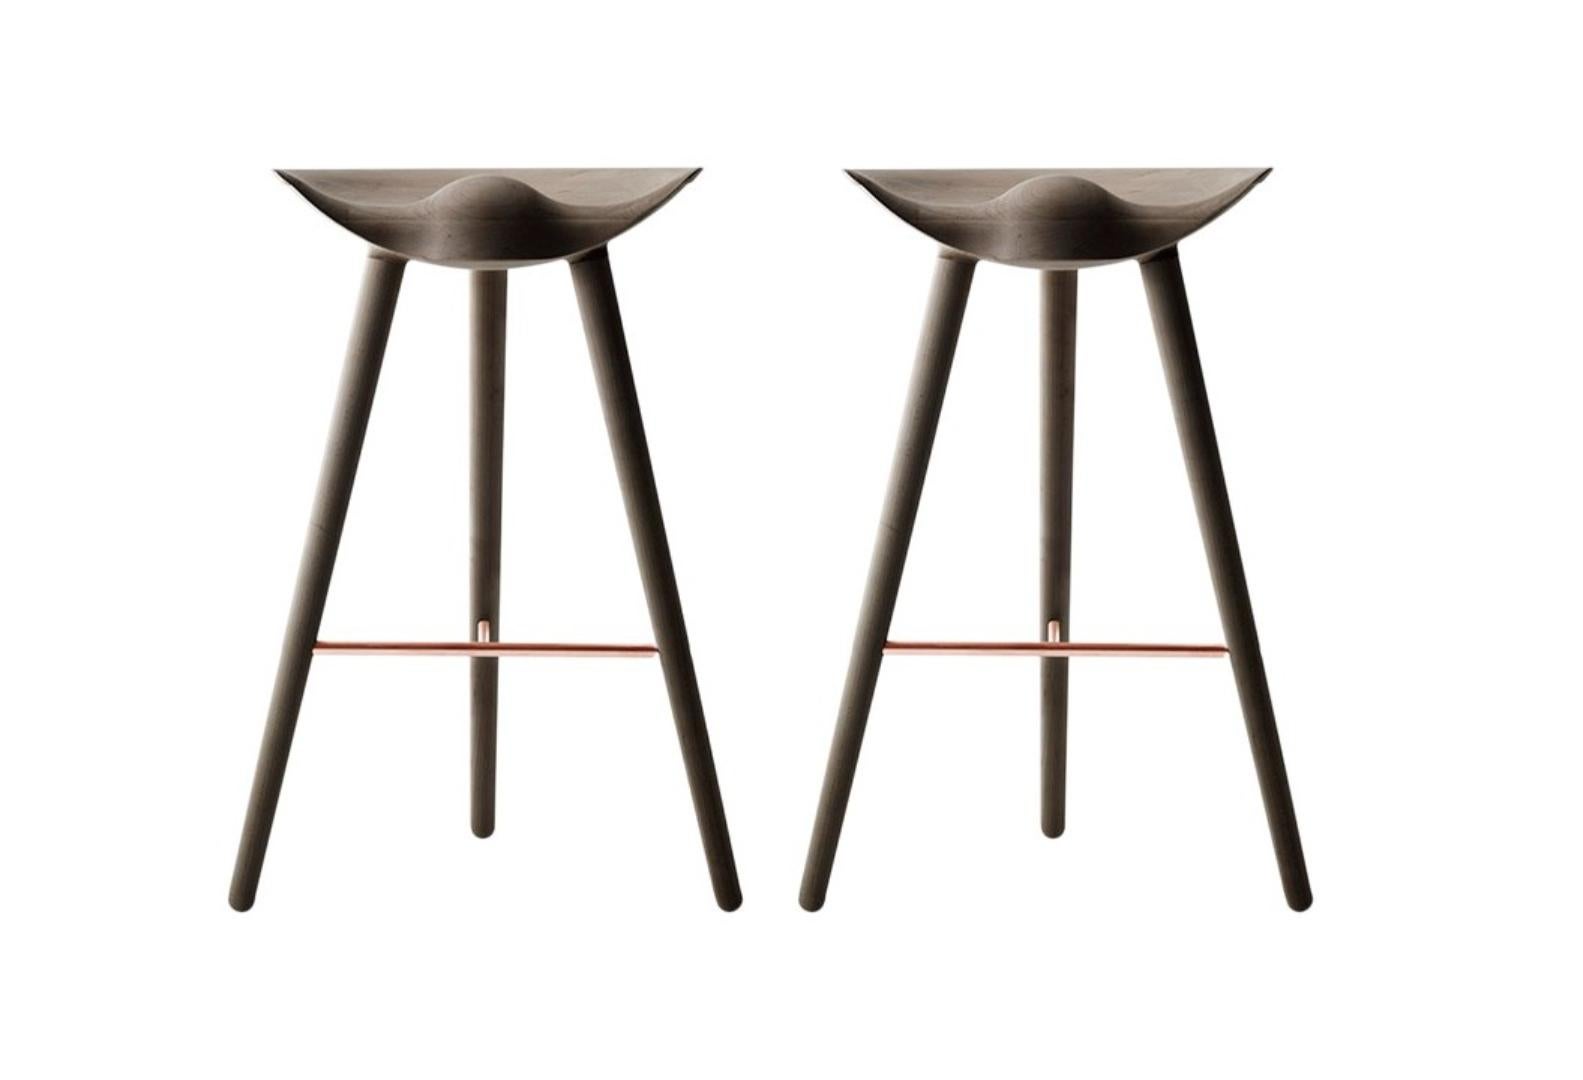 Set of 2 ML 42 brown oak and copper bar stools by Lassen
Dimensions: H 77 x W 36 x L 55.5 cm
Materials: oak, brass

In 1942 Mogens Lassen designed the Stool ML42 as a piece for a furniture exhibition held at the Danish Museum of Decorative Art. He